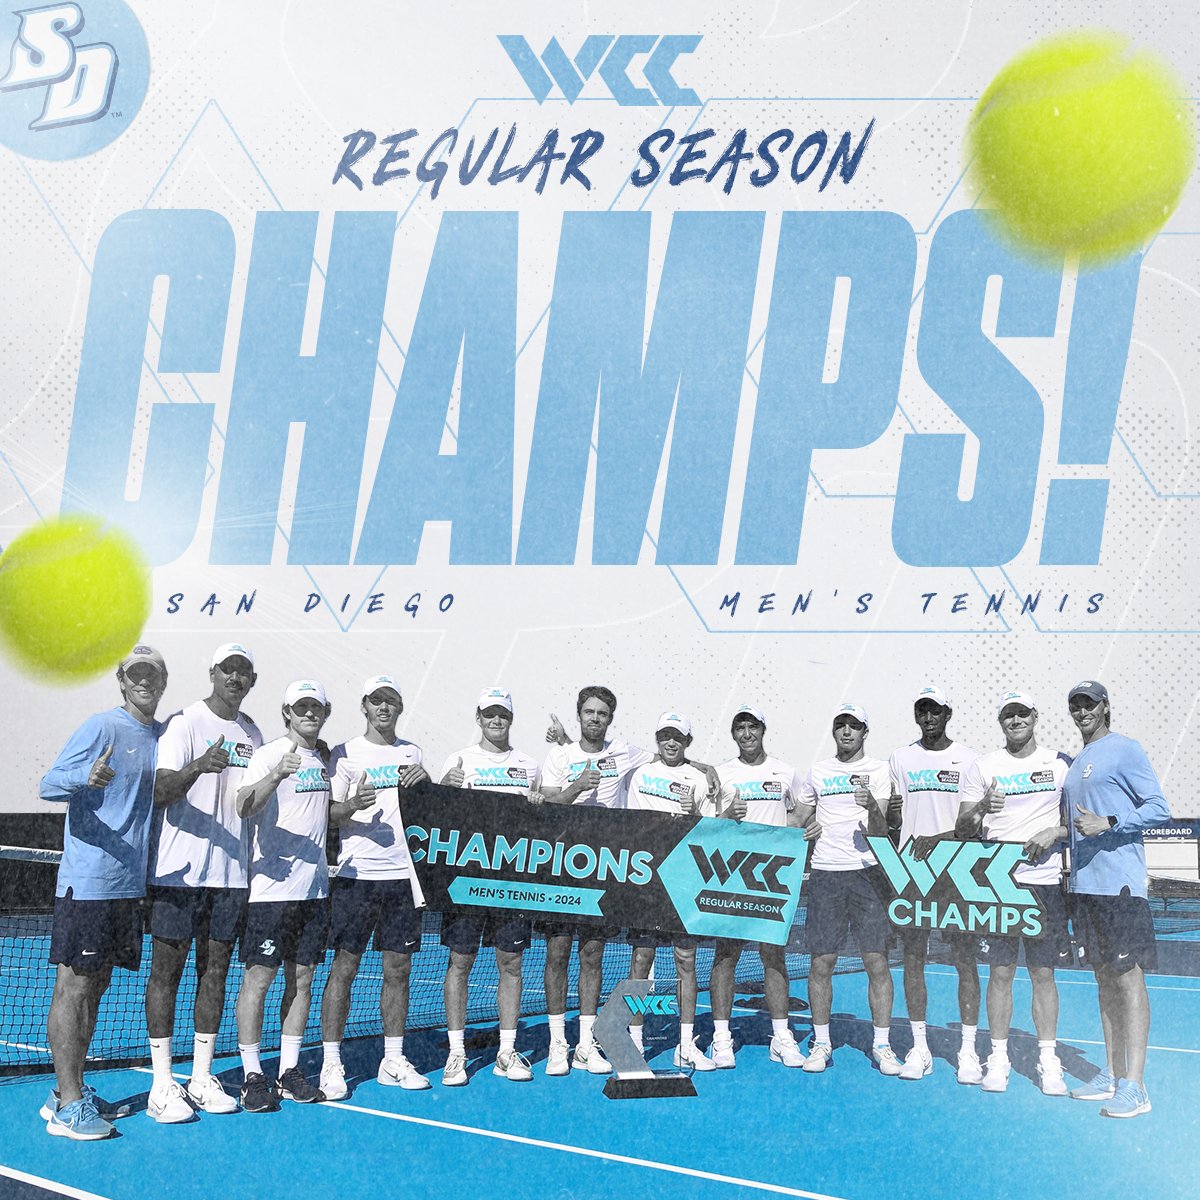 🏆 Champions Again 🏆 @USDmtennis surges past LMU and secures a share of the @WCCsports regular season title for the 8th time in the last 10 years! #GoToreros